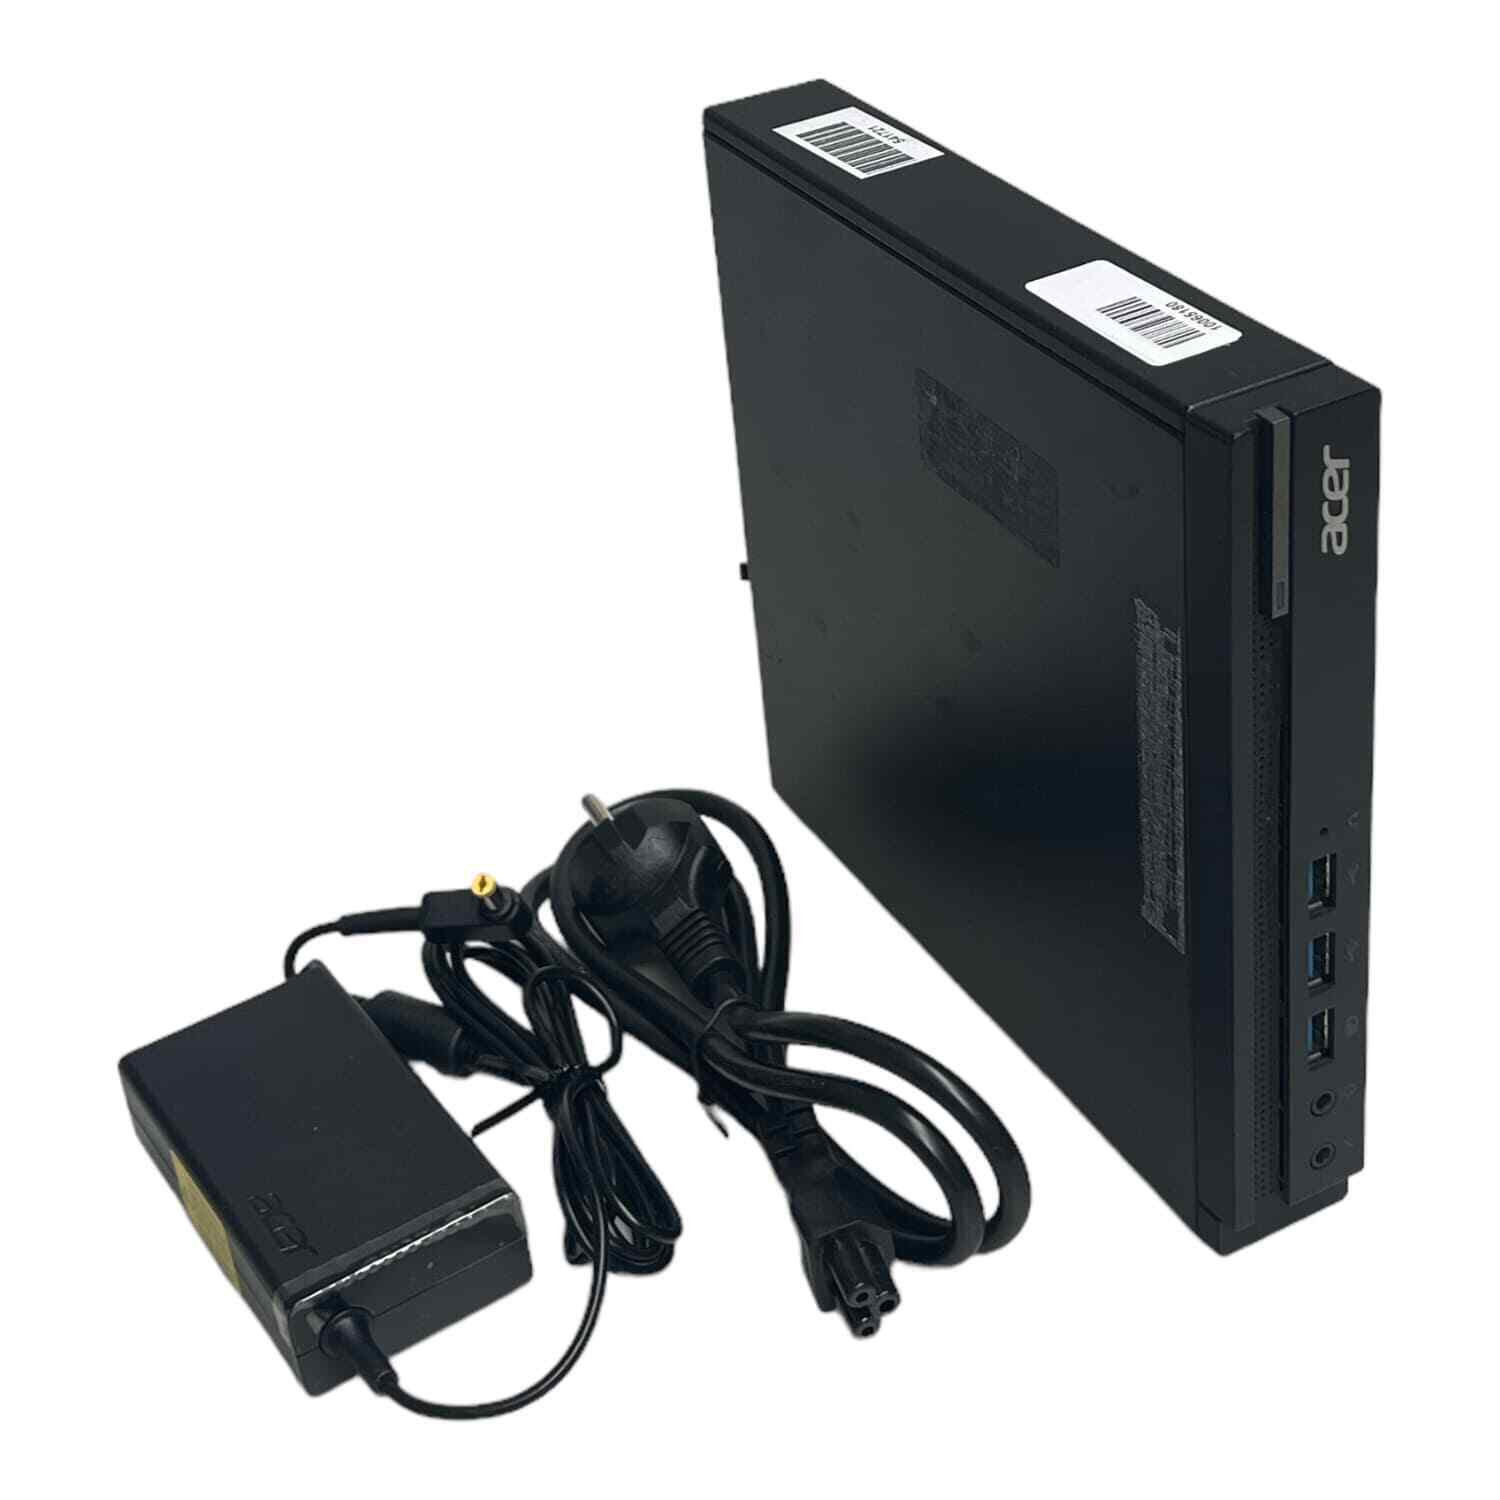 Acer Veriton N4640G i5 2.5GHz 8GB 256GB M.2 Mini PC 20x19x4cm (Adhesive Removal)